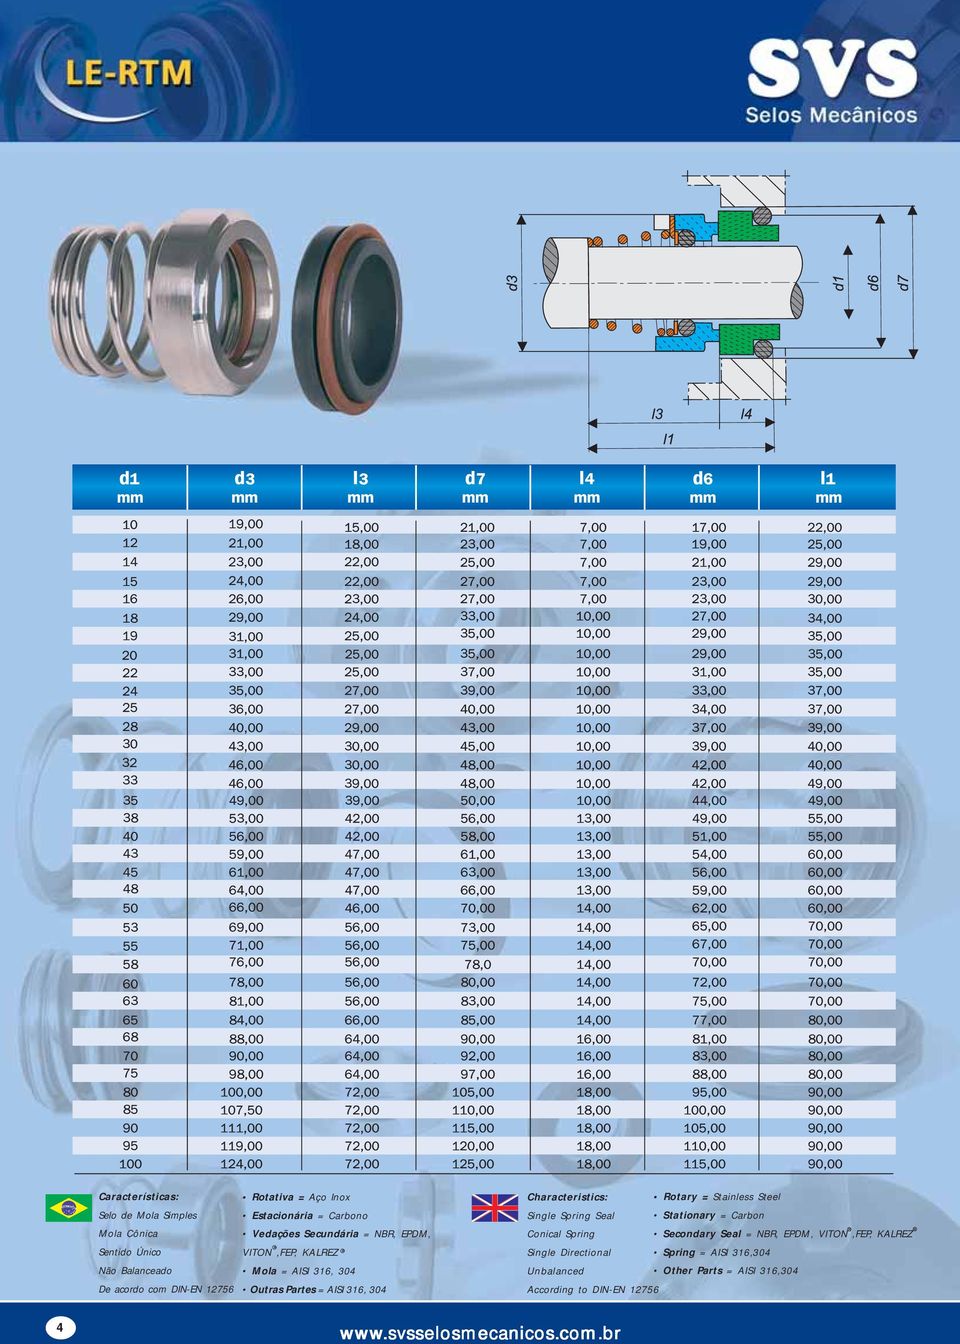 Partes = AISI 316, 304 Conical Spring Single Directional According to DIN-EN 12756 otary = Stainless